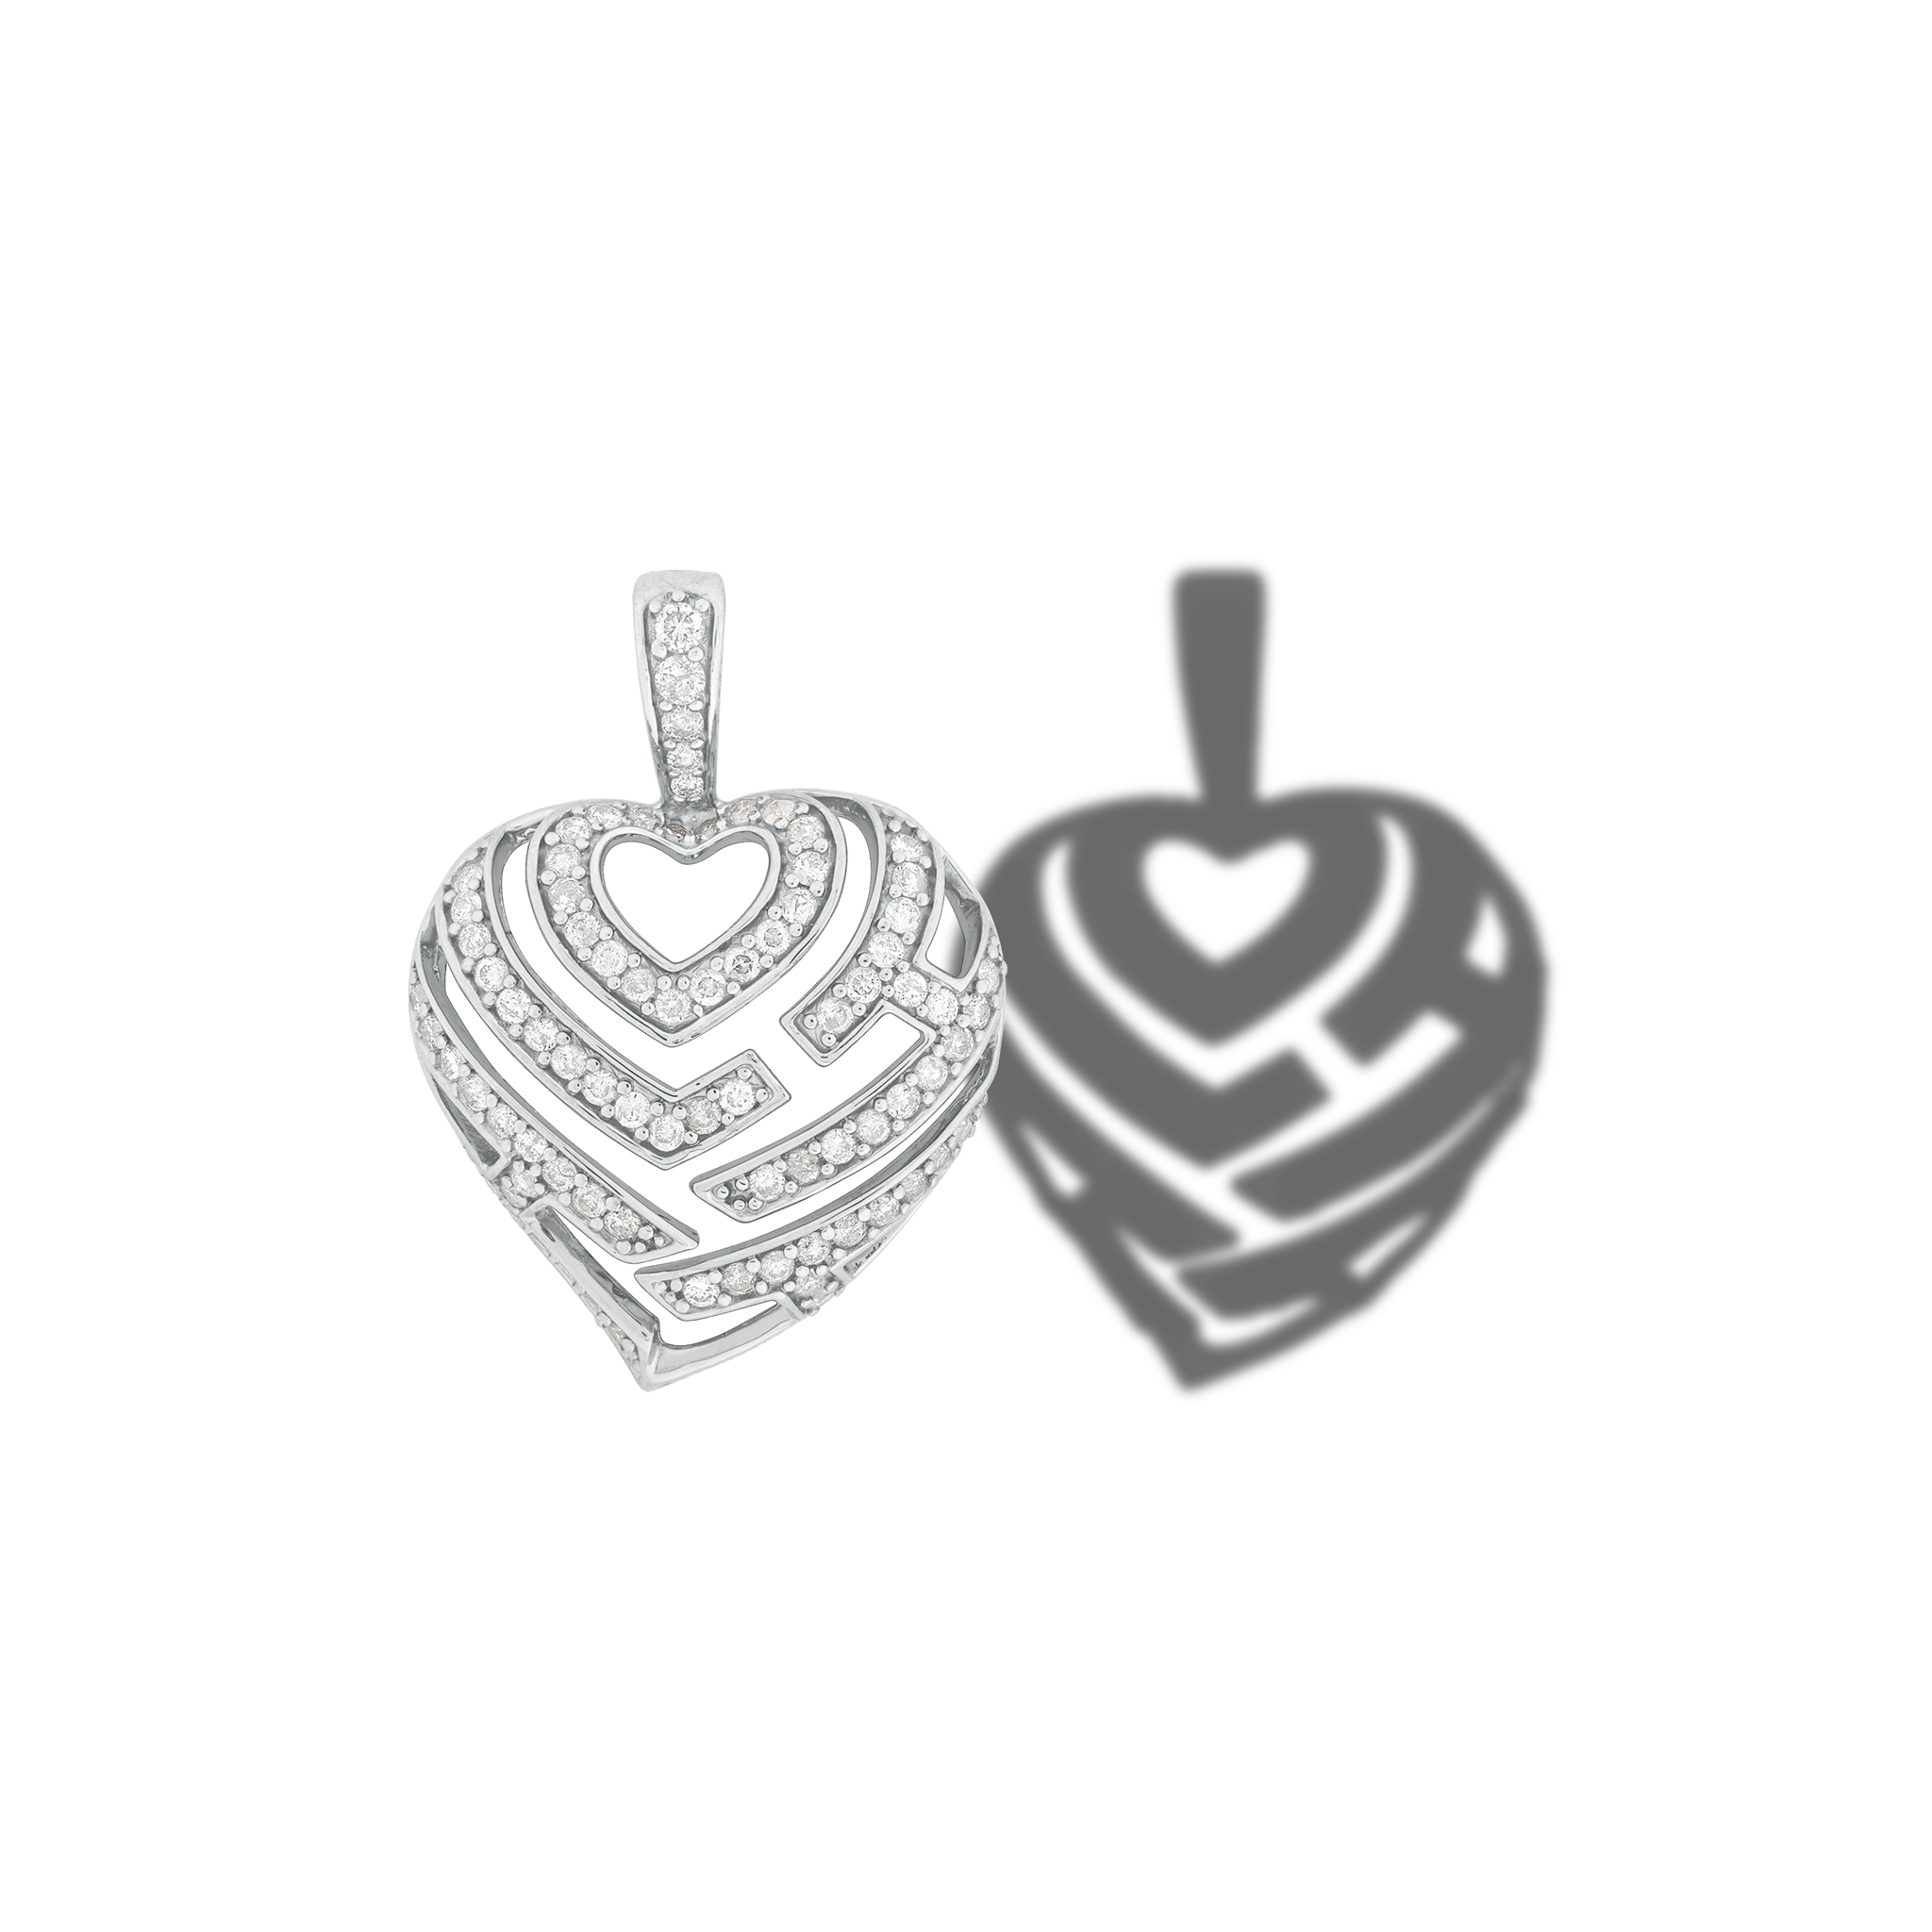 Aloha Heart Pendant in White Gold with Diamonds - 18mm